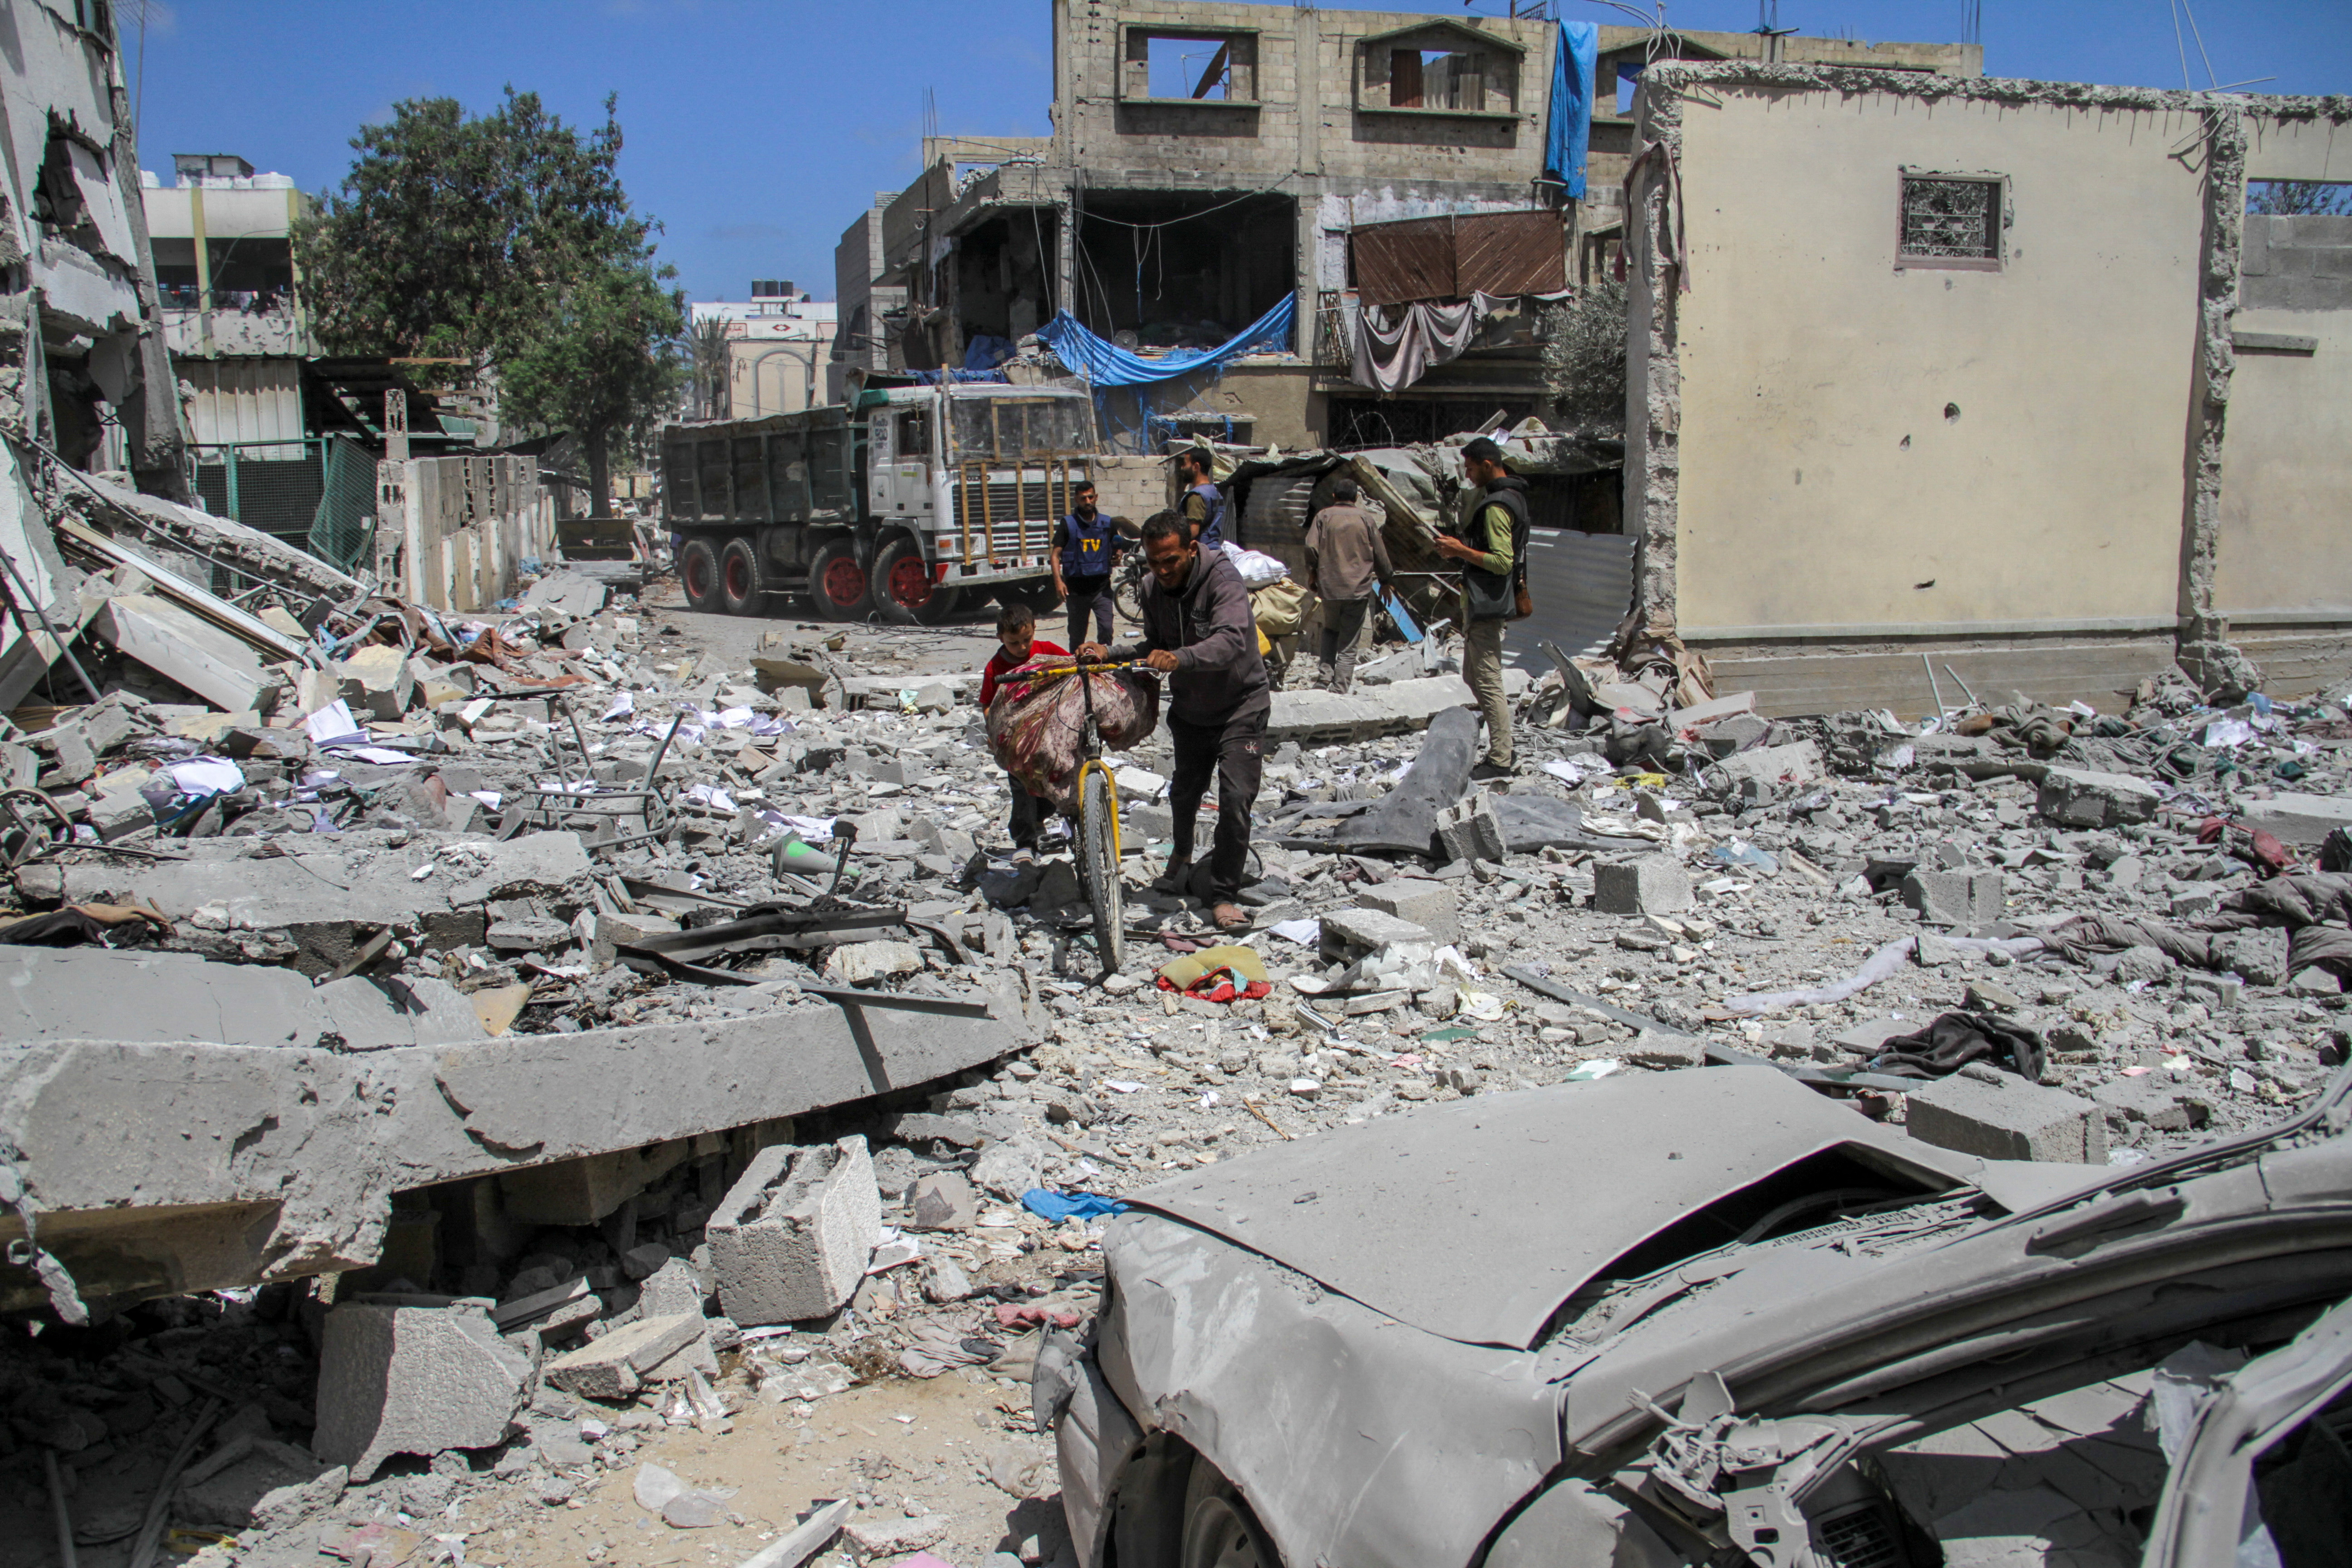 Palestinians inspect the damages at Zeitoun neighborhood after Israeli forces withdrew from the area, in Gaza City